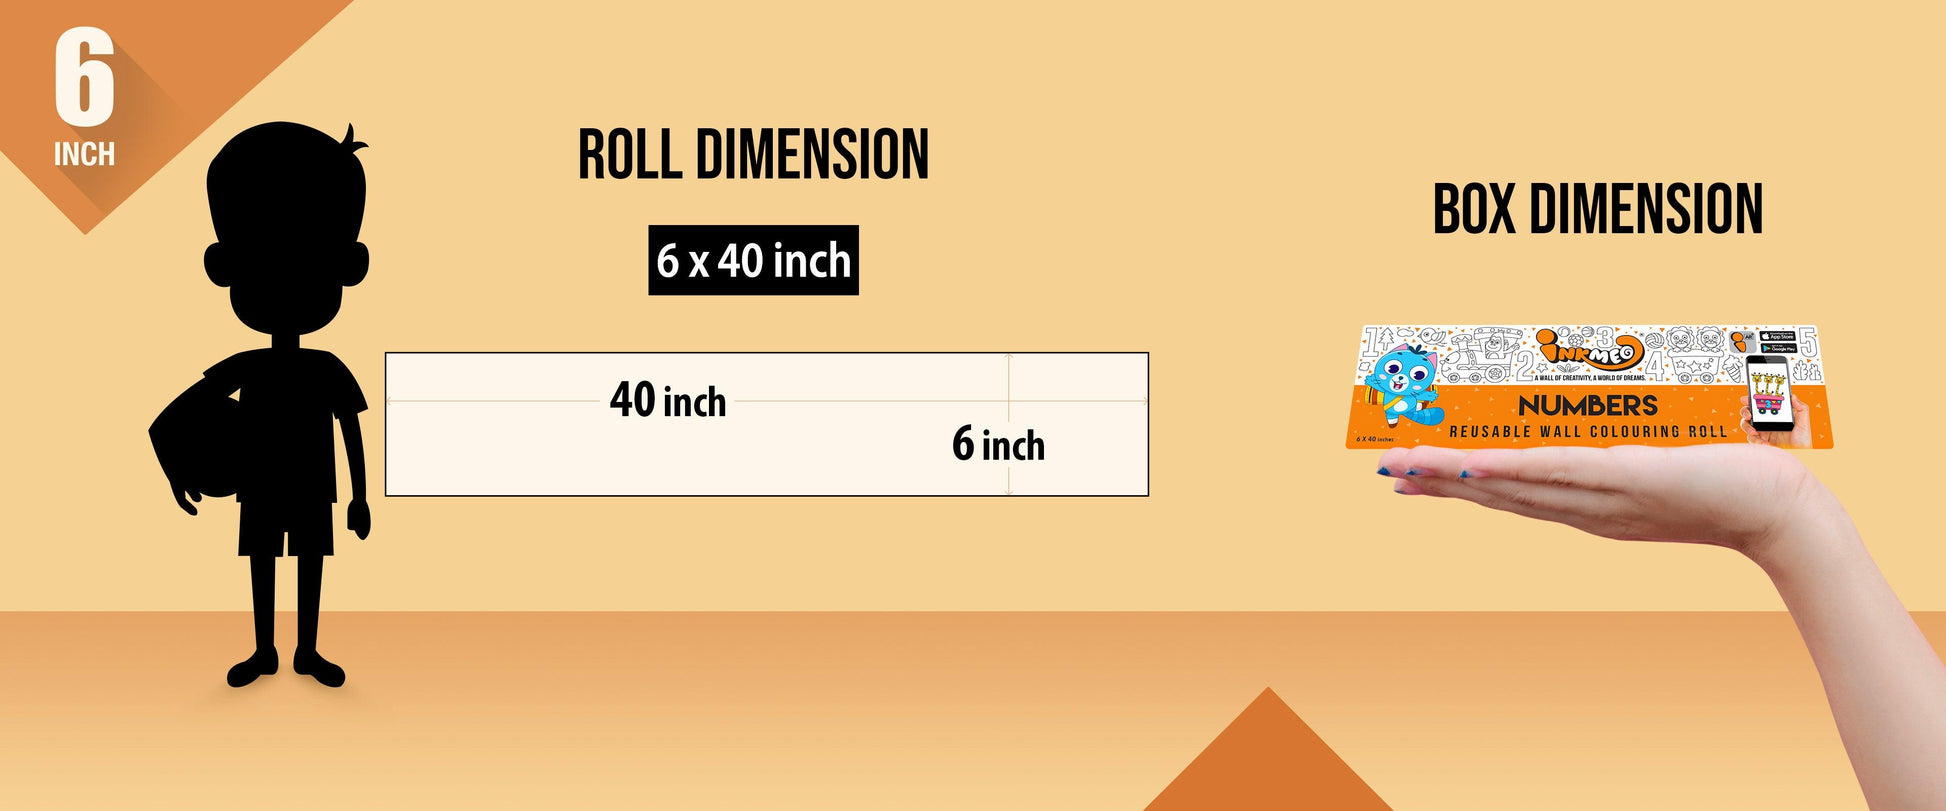 The image depicts an orange background with a ruler showing a child's height next to a 6*40 inches paper roll attached to the wall, alongside a picture of a box dimension.